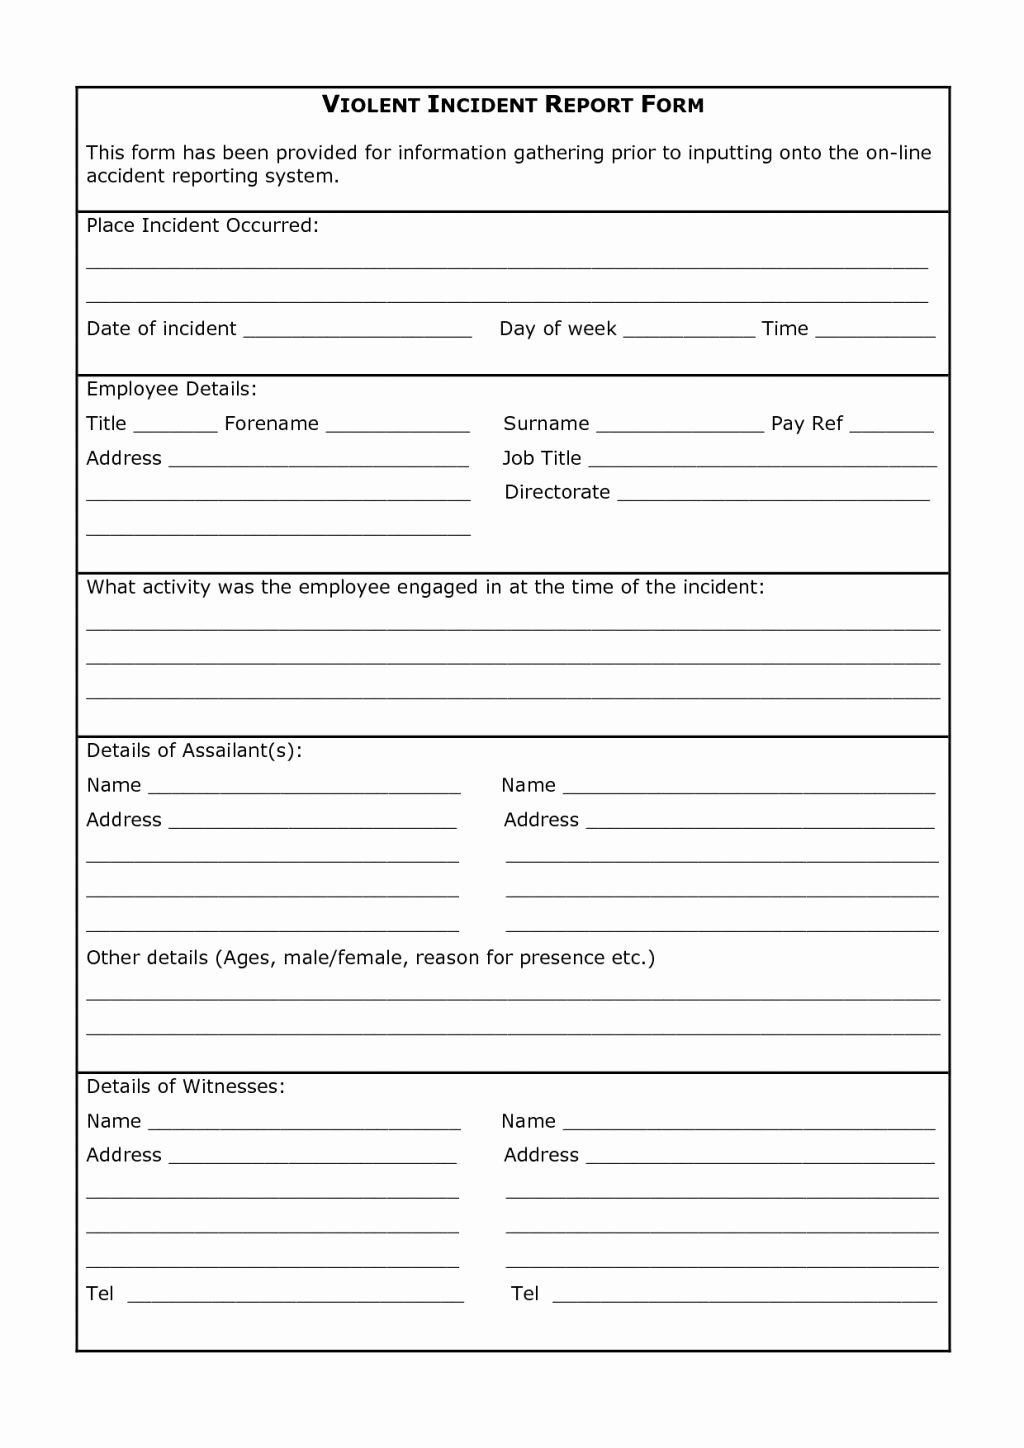 Workplace Incident Report form Template Free Beautiful Accident Report form Template Word Uk Hse for Workplace